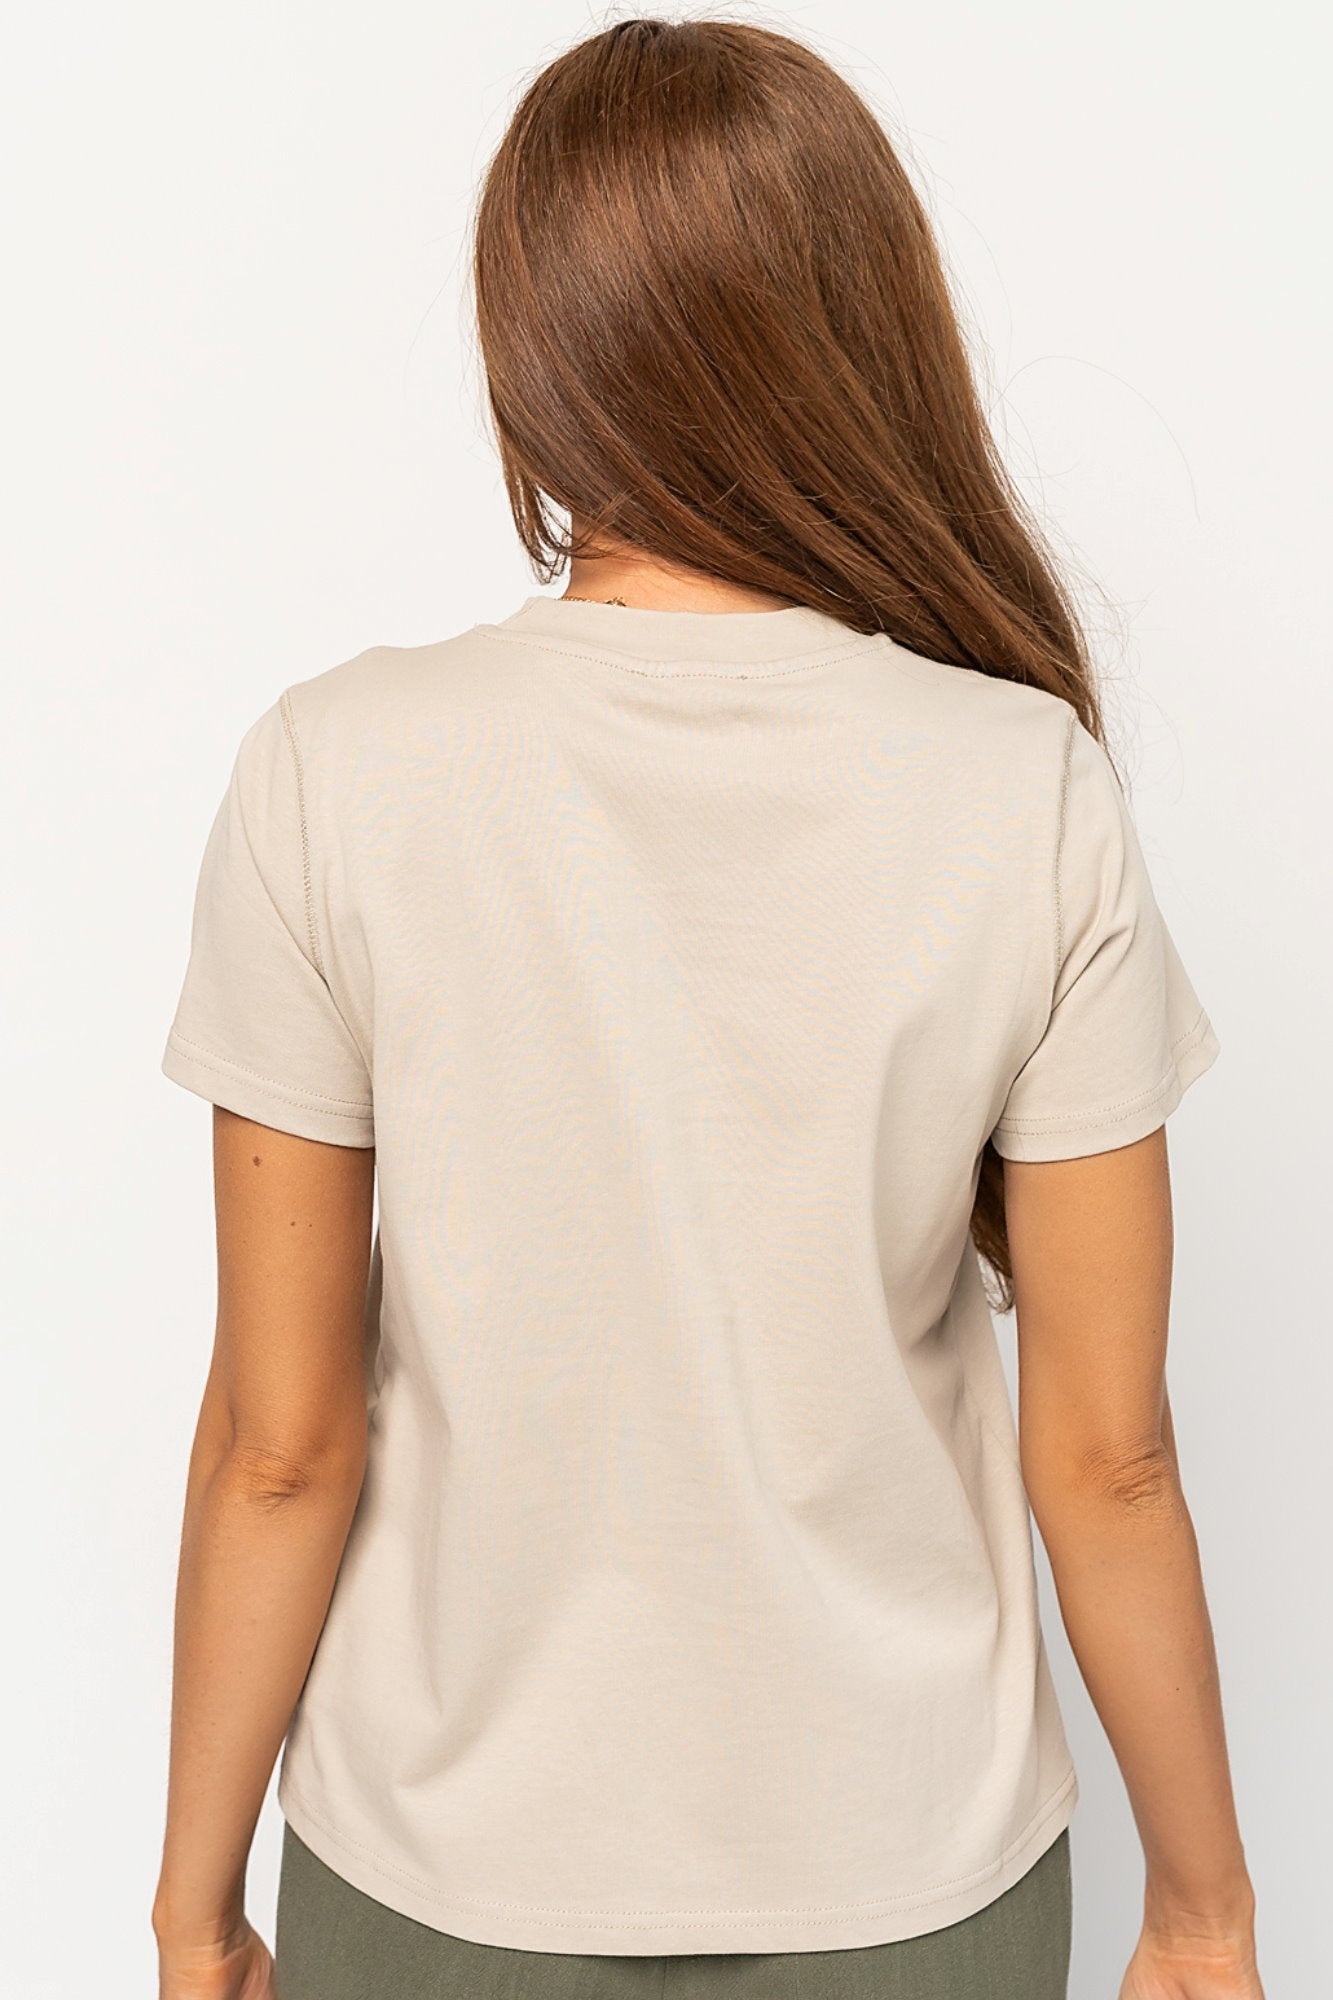 Grady Top in White (Small-XL) Holley Girl 